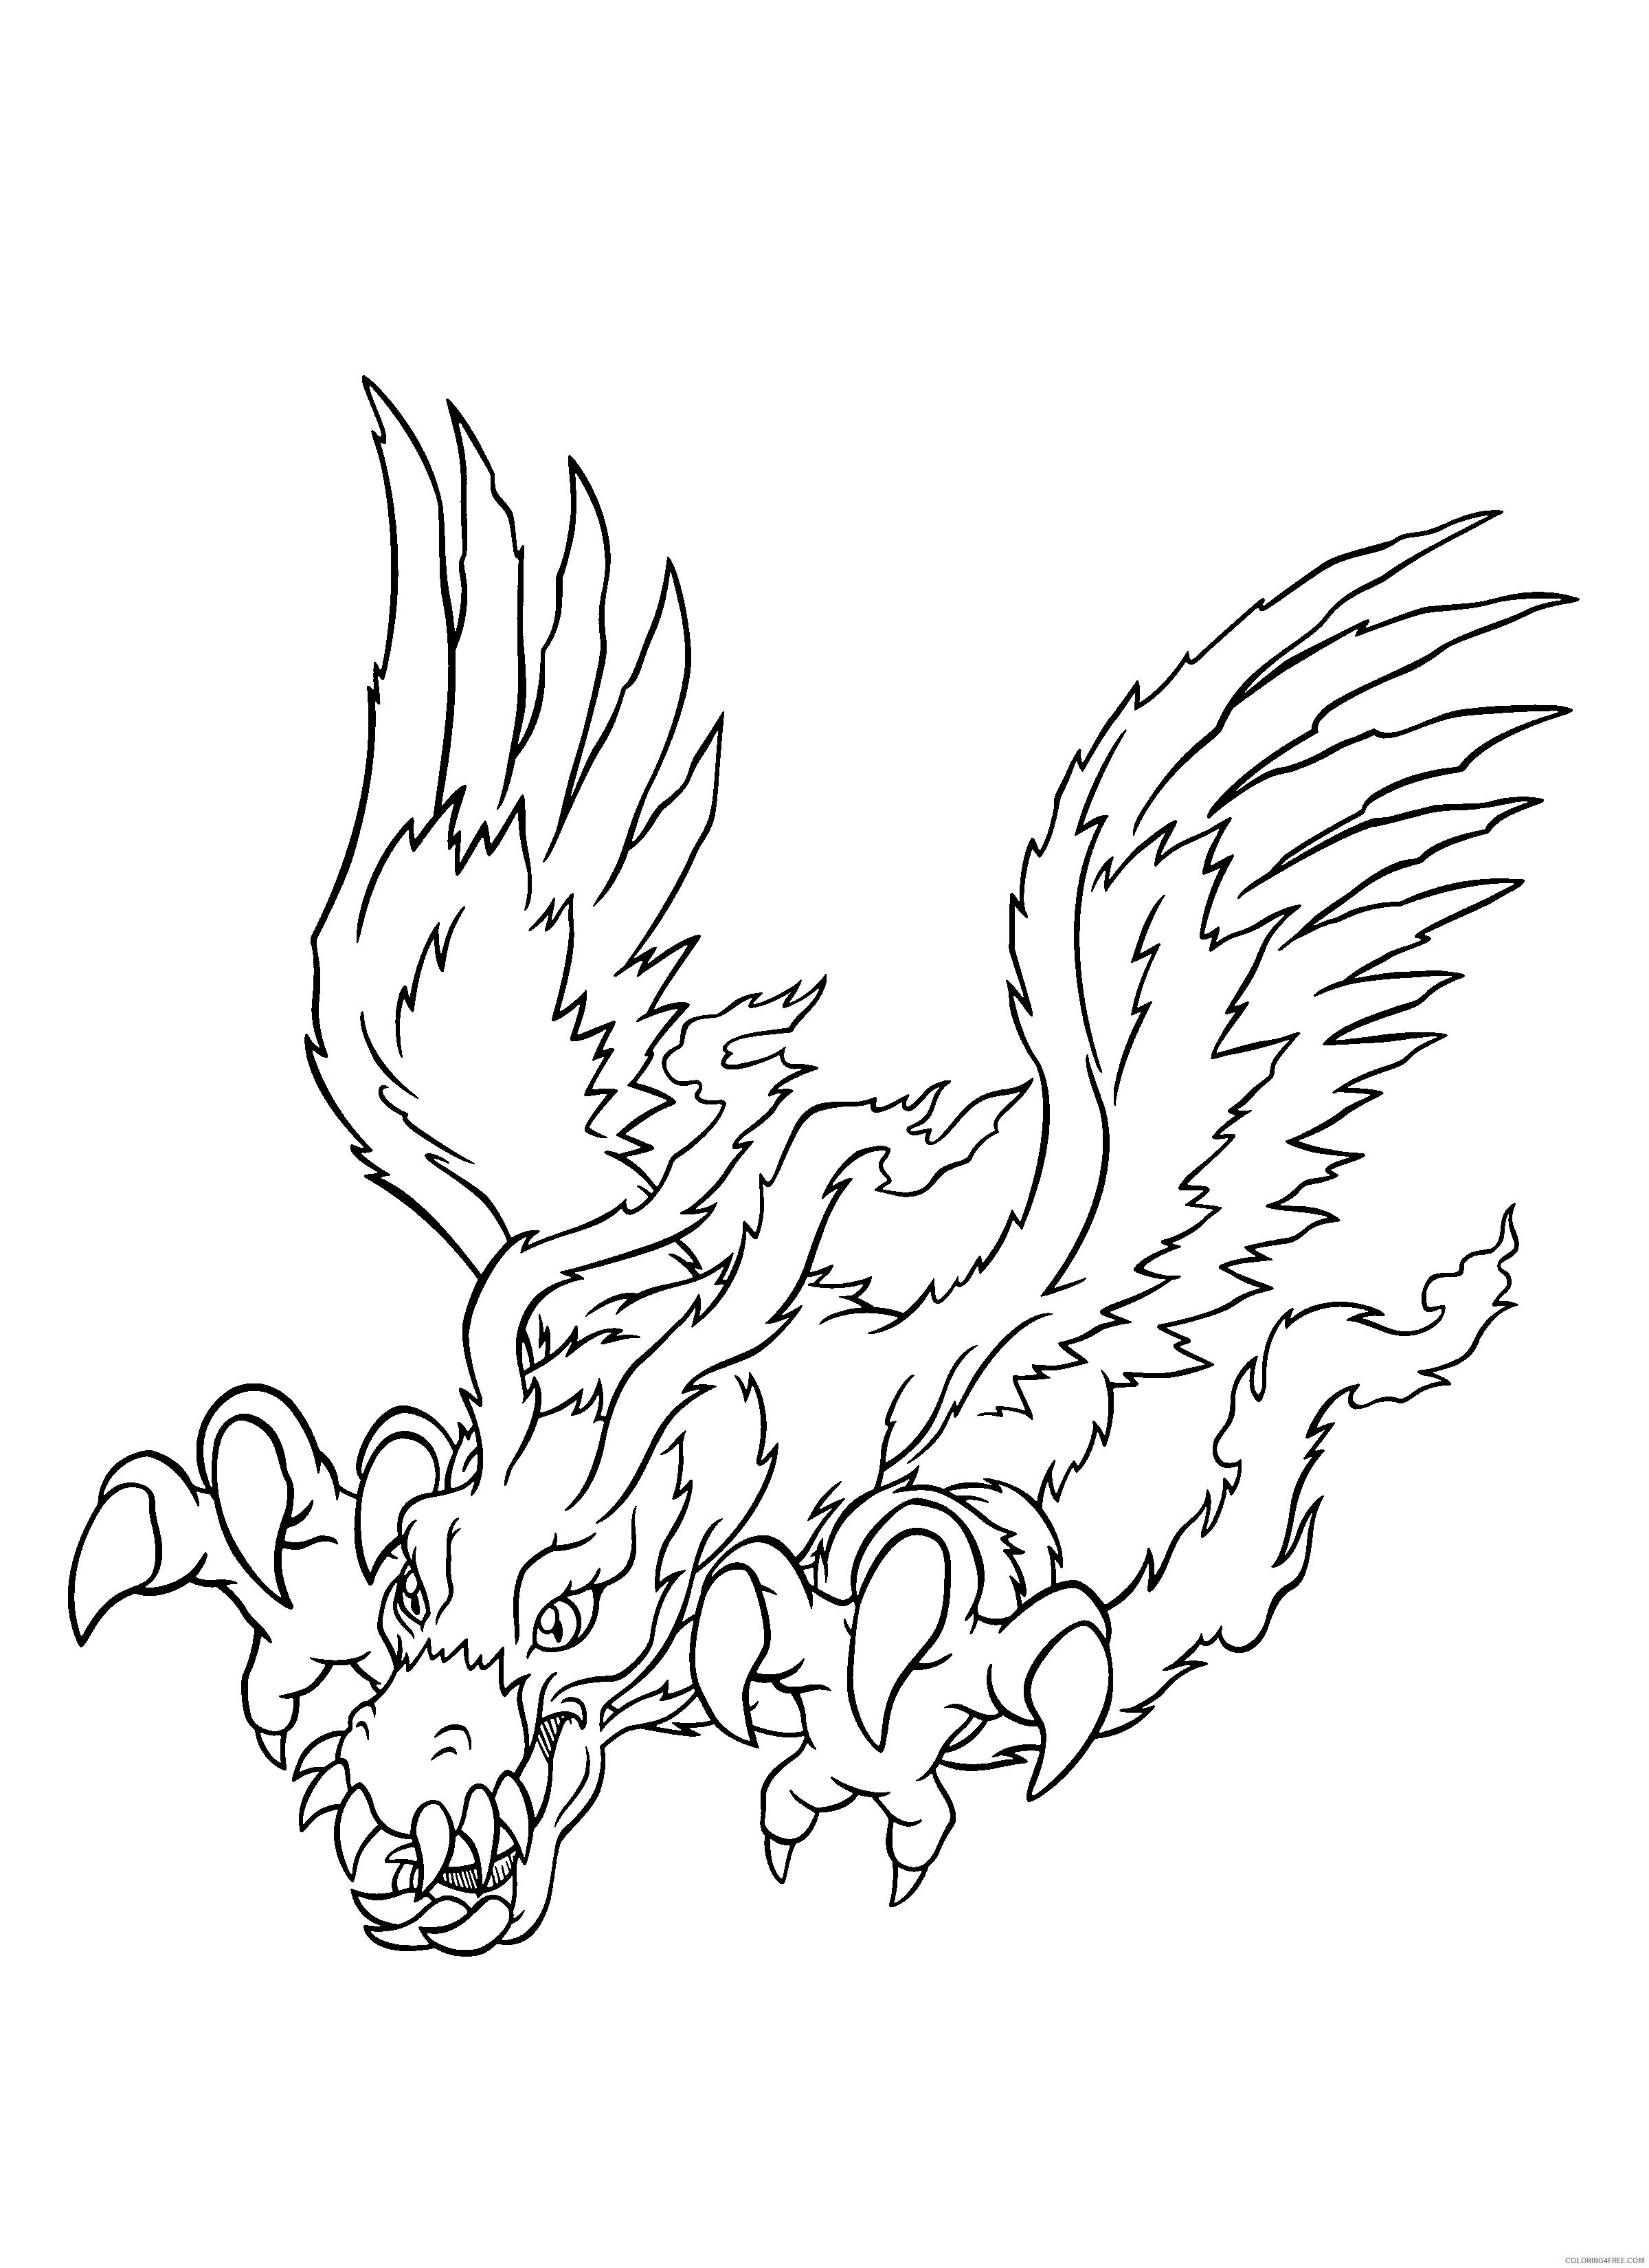 Digimon Printable Coloring Pages Anime digimon 243 2021 0325 Coloring4free